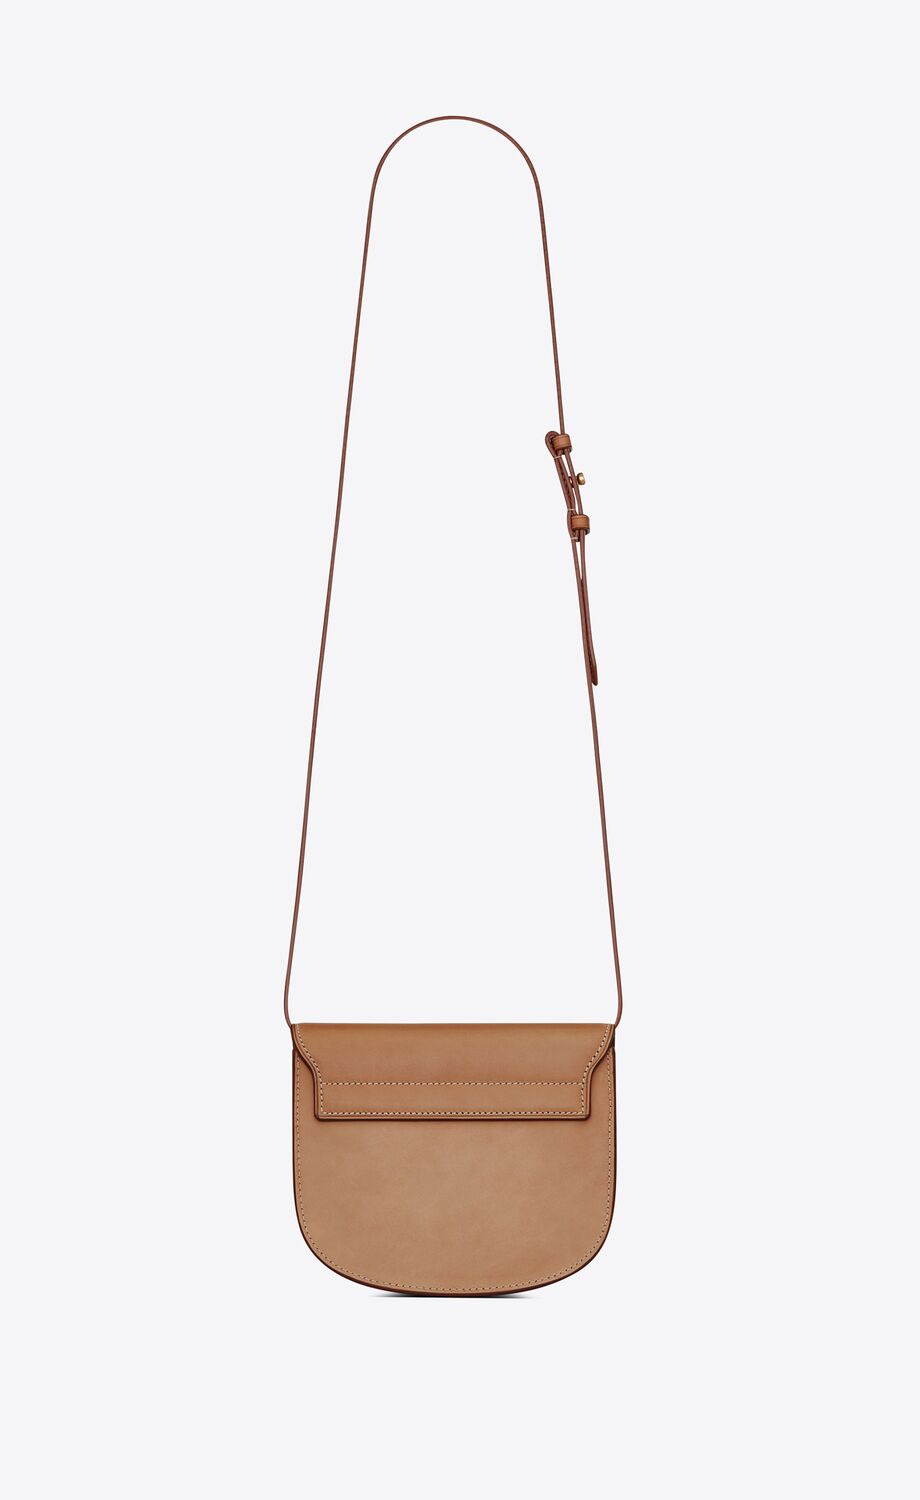 KAIA small satchel in smooth vintage leather | Saint Laurent | YSL.com